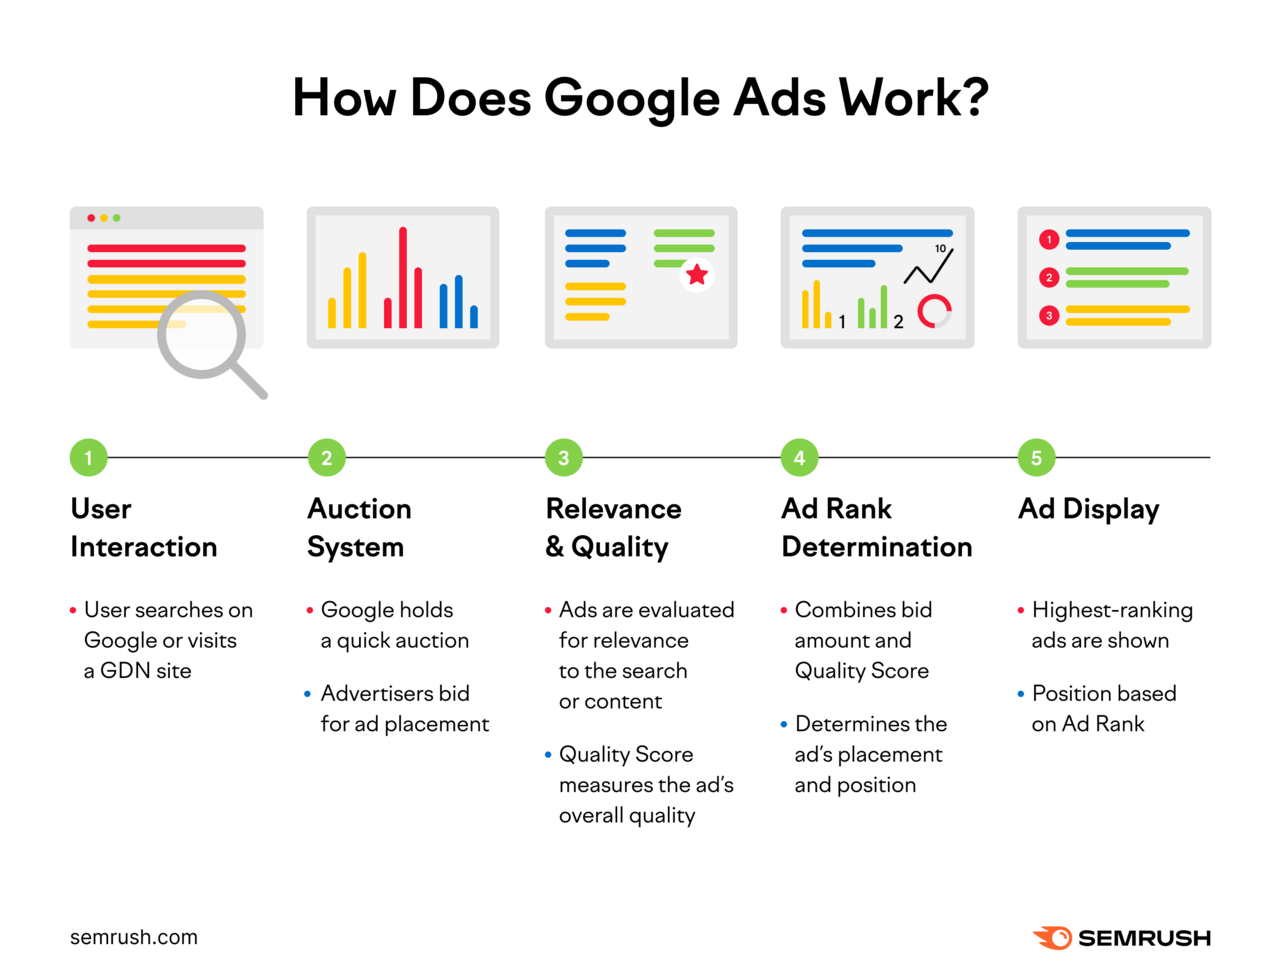 Google Ads works   by idiosyncratic    interacting with Google, advertisers bid for advertisement  placement, Google evaluates the ad, Google determines advertisement  rank, past    the advertisement  is displayed.